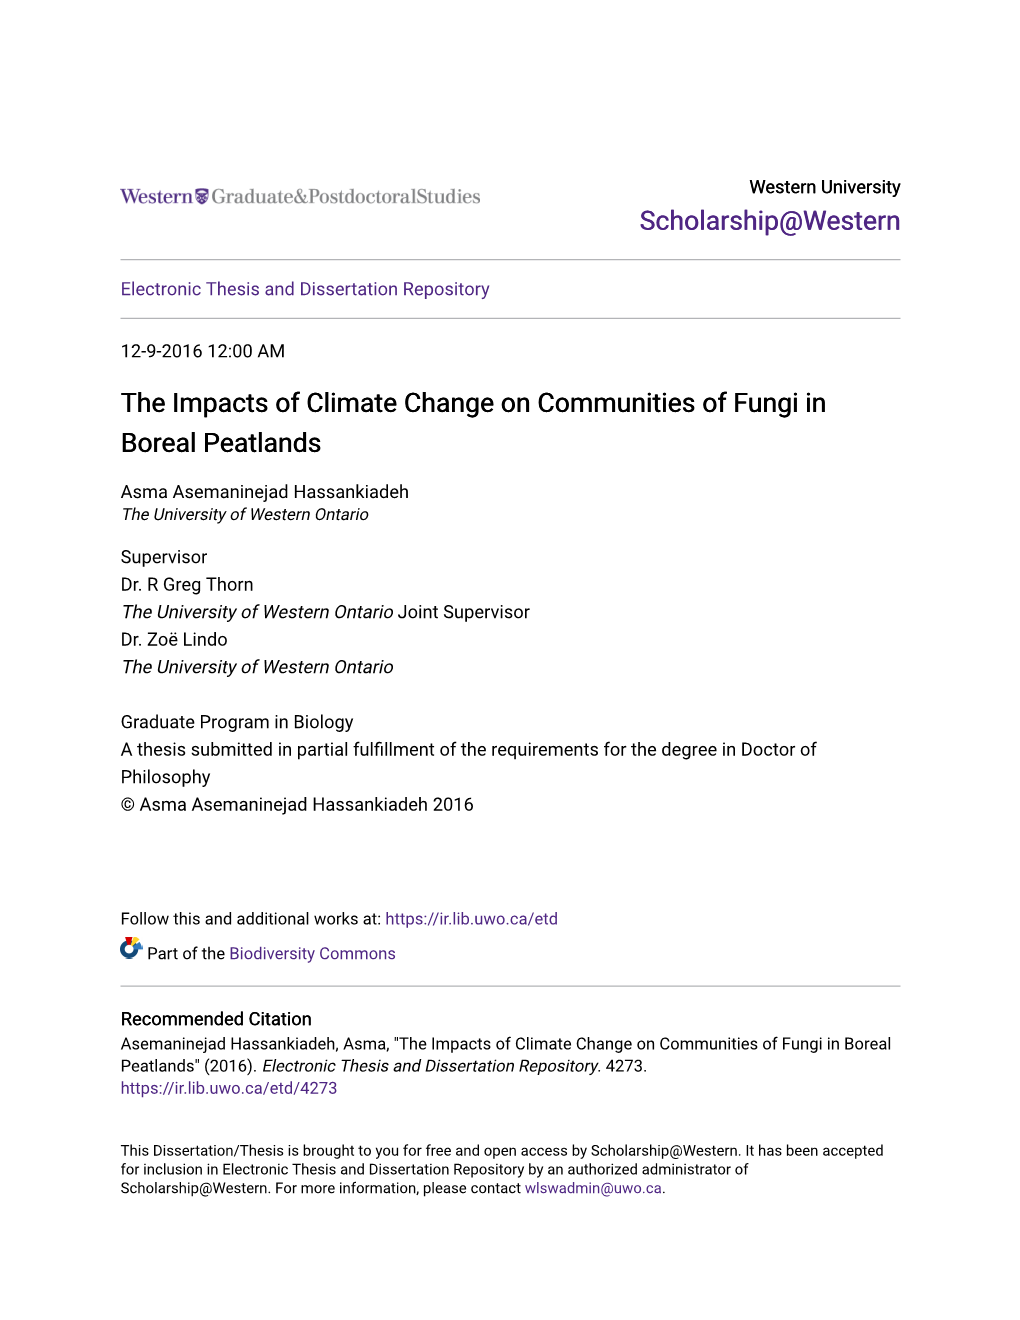 The Impacts of Climate Change on Communities of Fungi in Boreal Peatlands